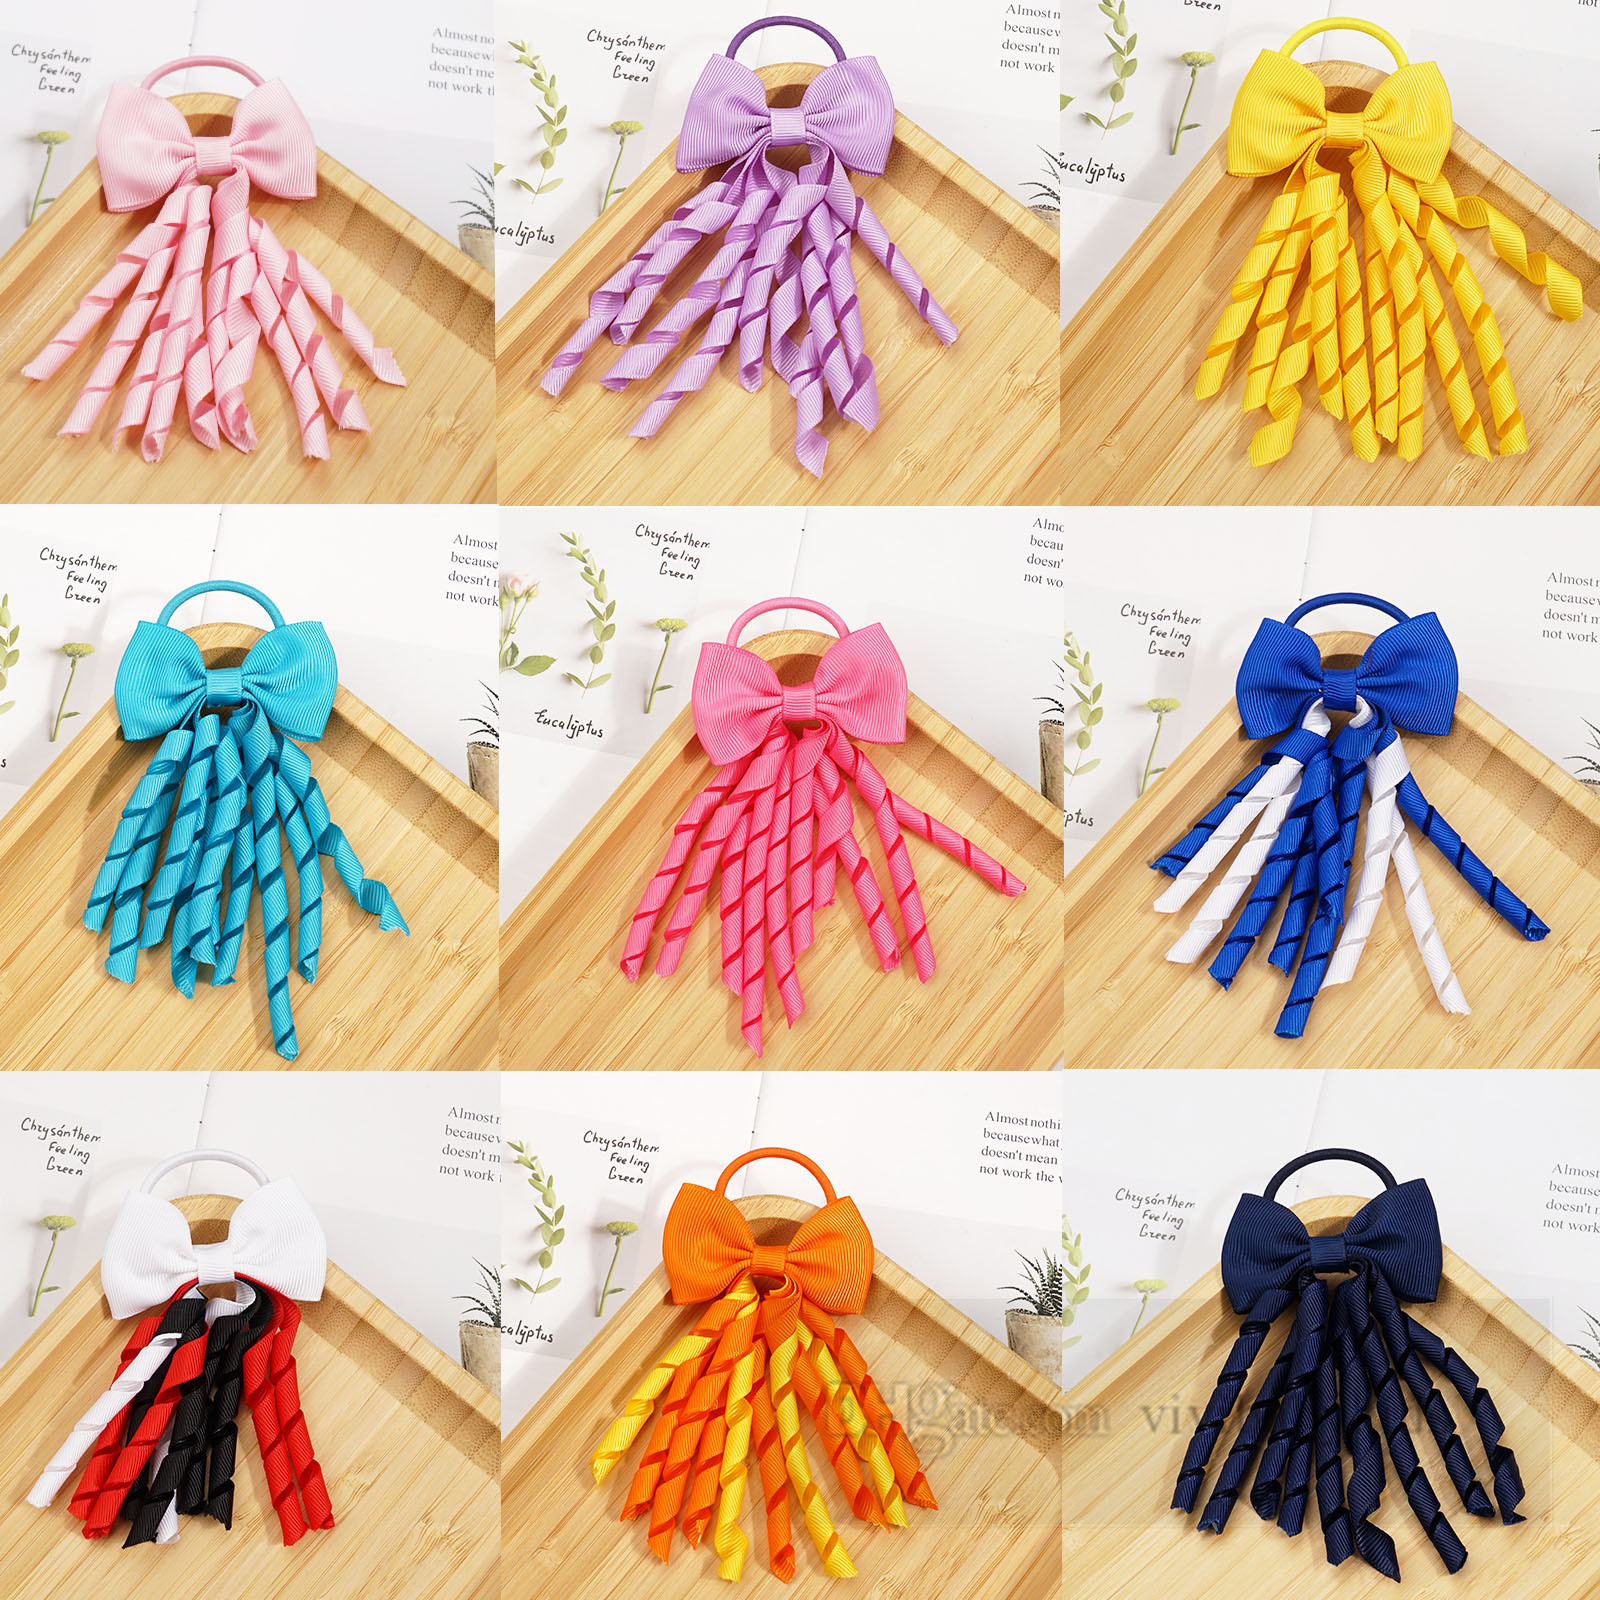 Sweet Girls Bows Curled tassels hairbands children ring elastic ponytail kids Rubber band cheerleading team hair accessories Z6182